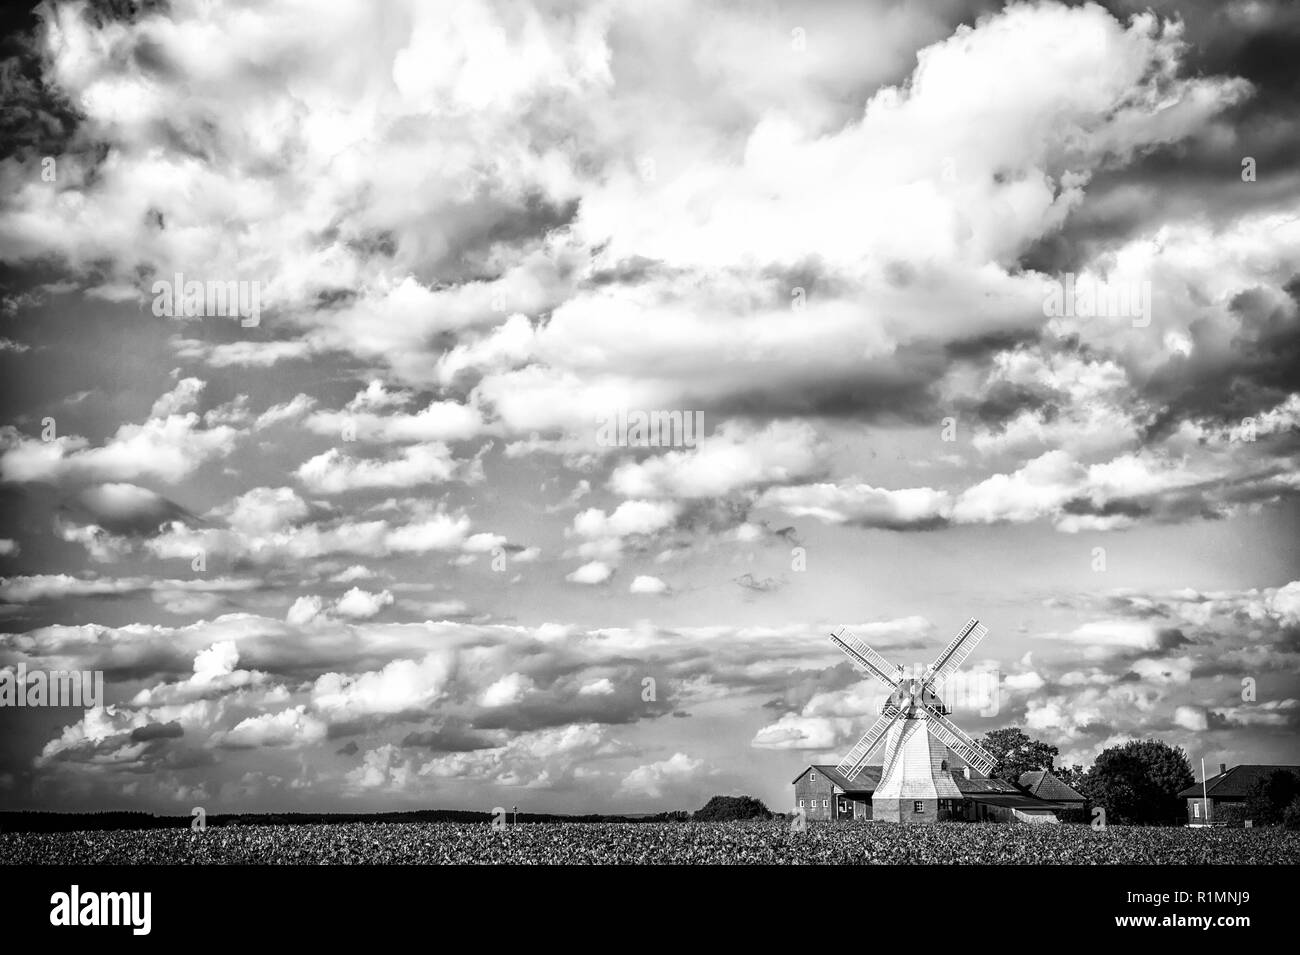 Cloudscape With Windmill And Farm Farming Mill And Cottage